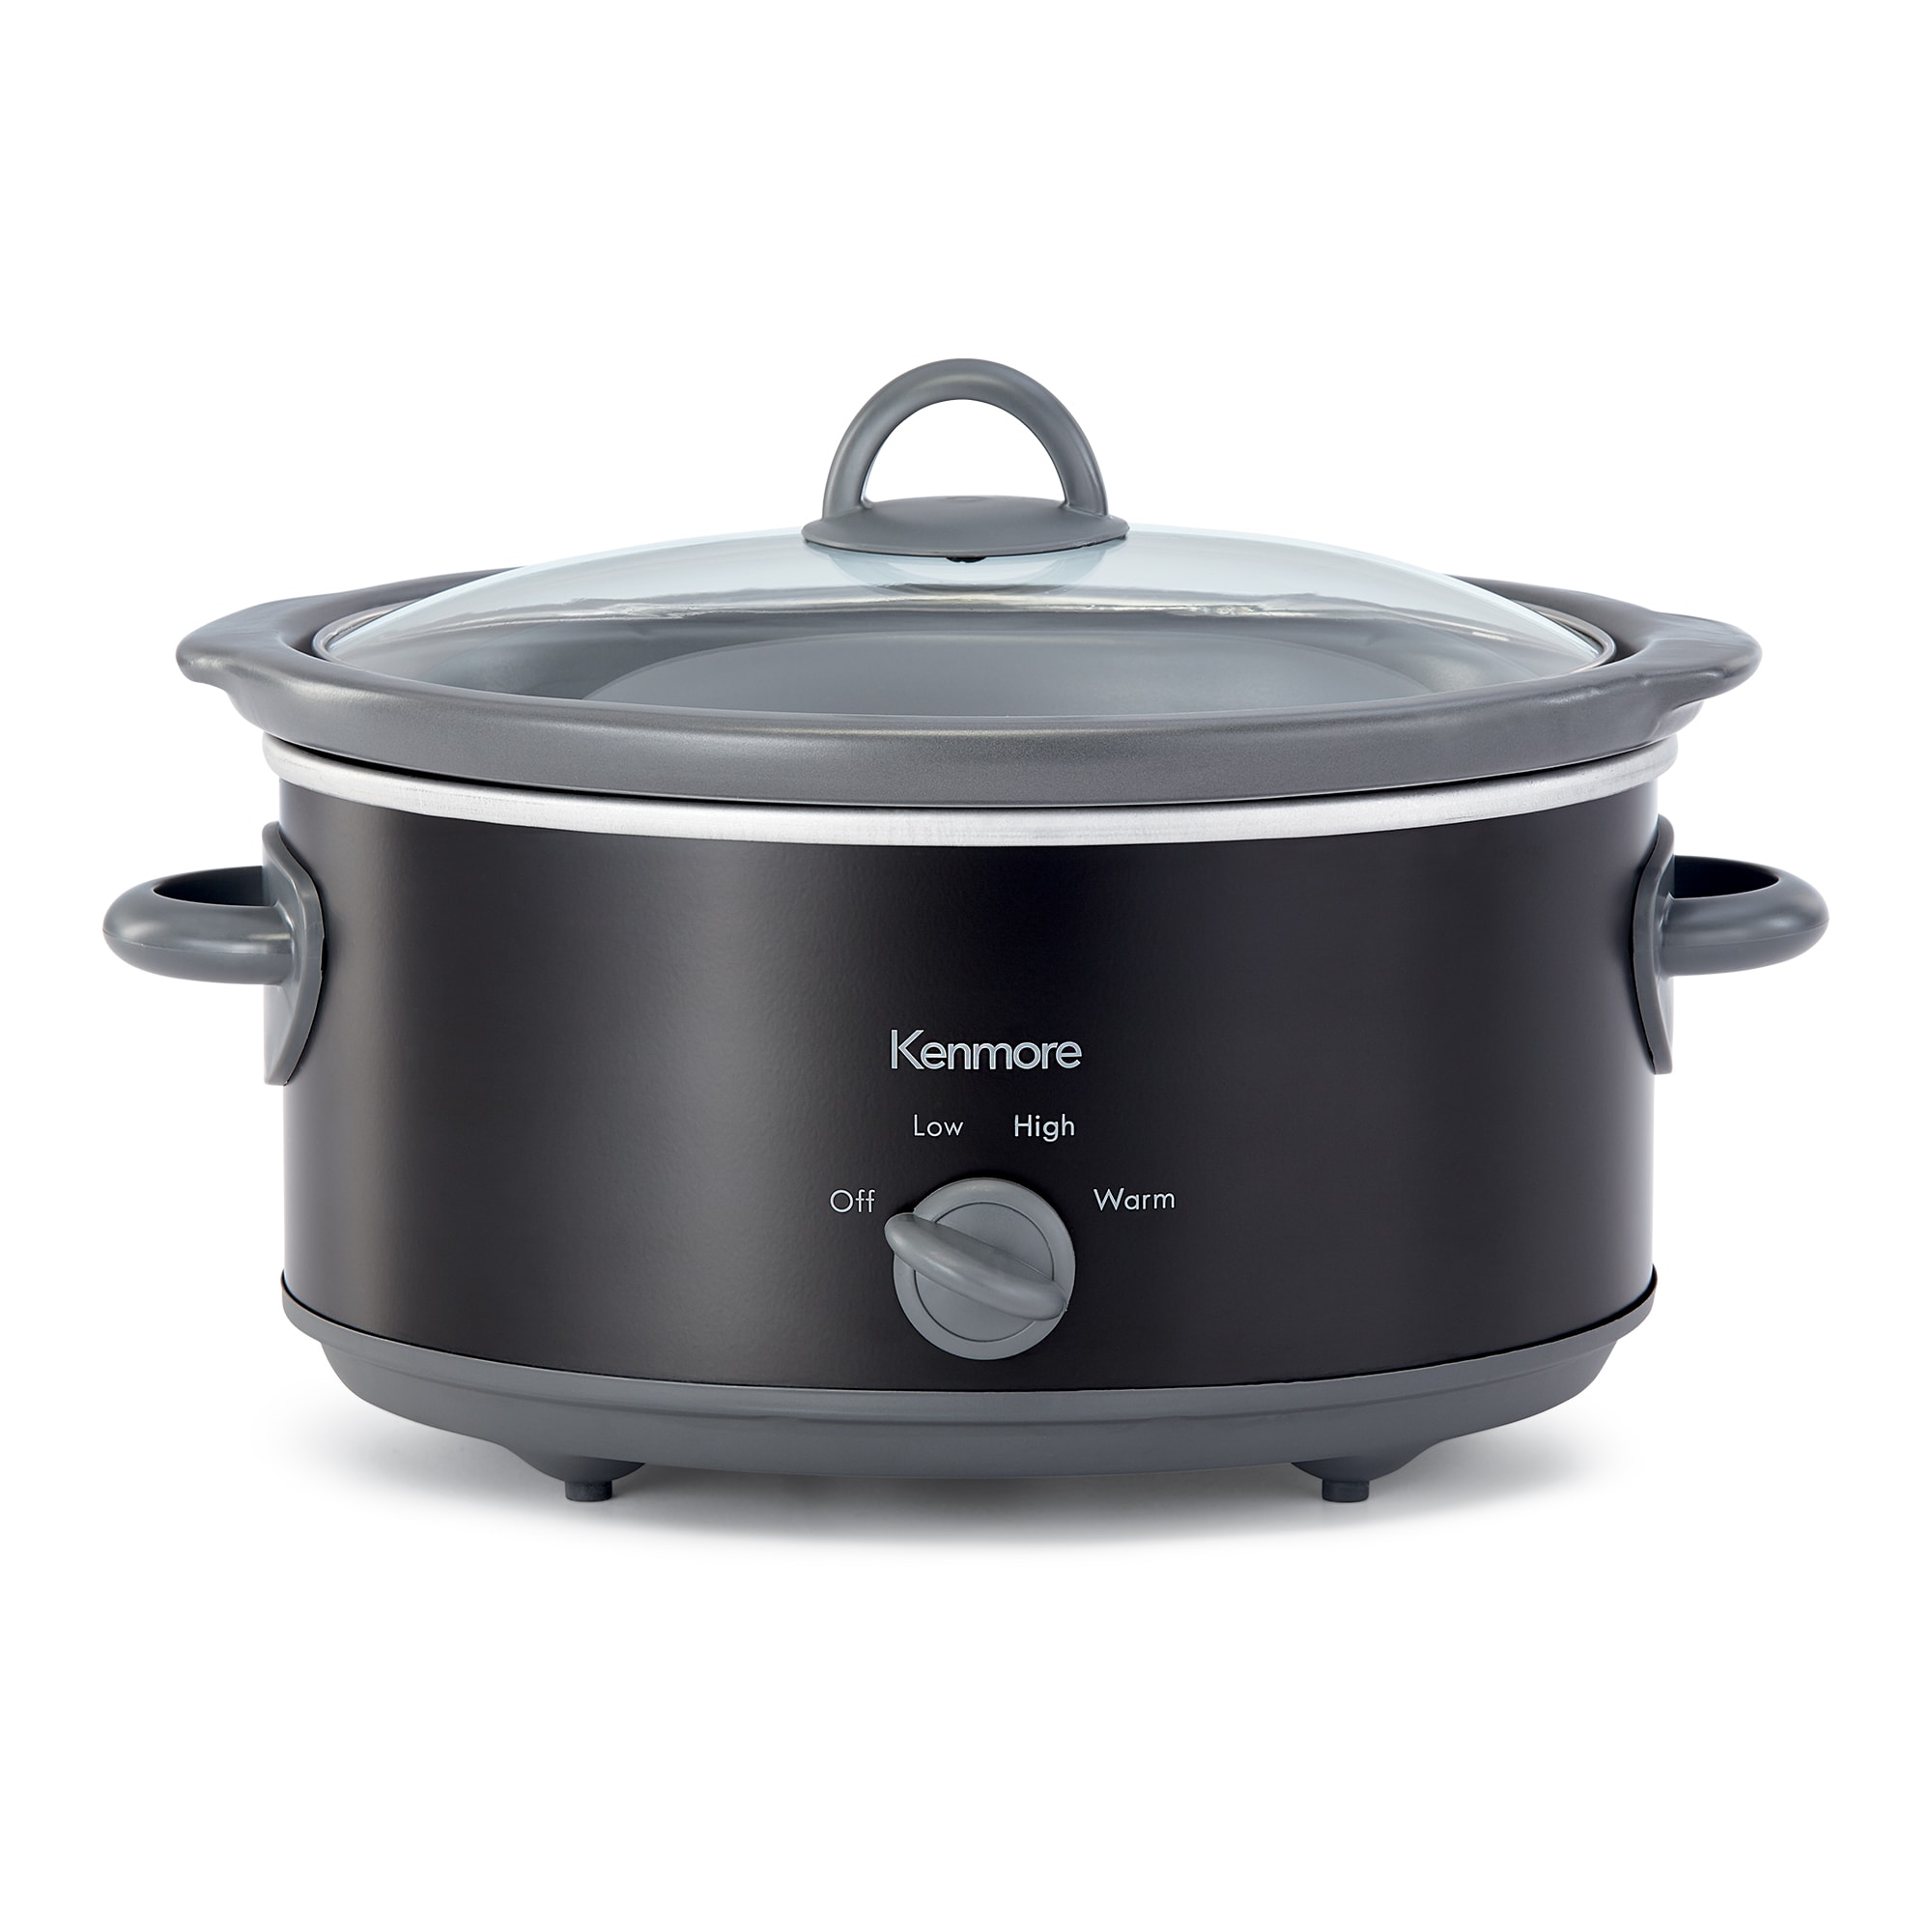 Courant 7.0 Quart Oval Slow Cooker, Stainless Steel